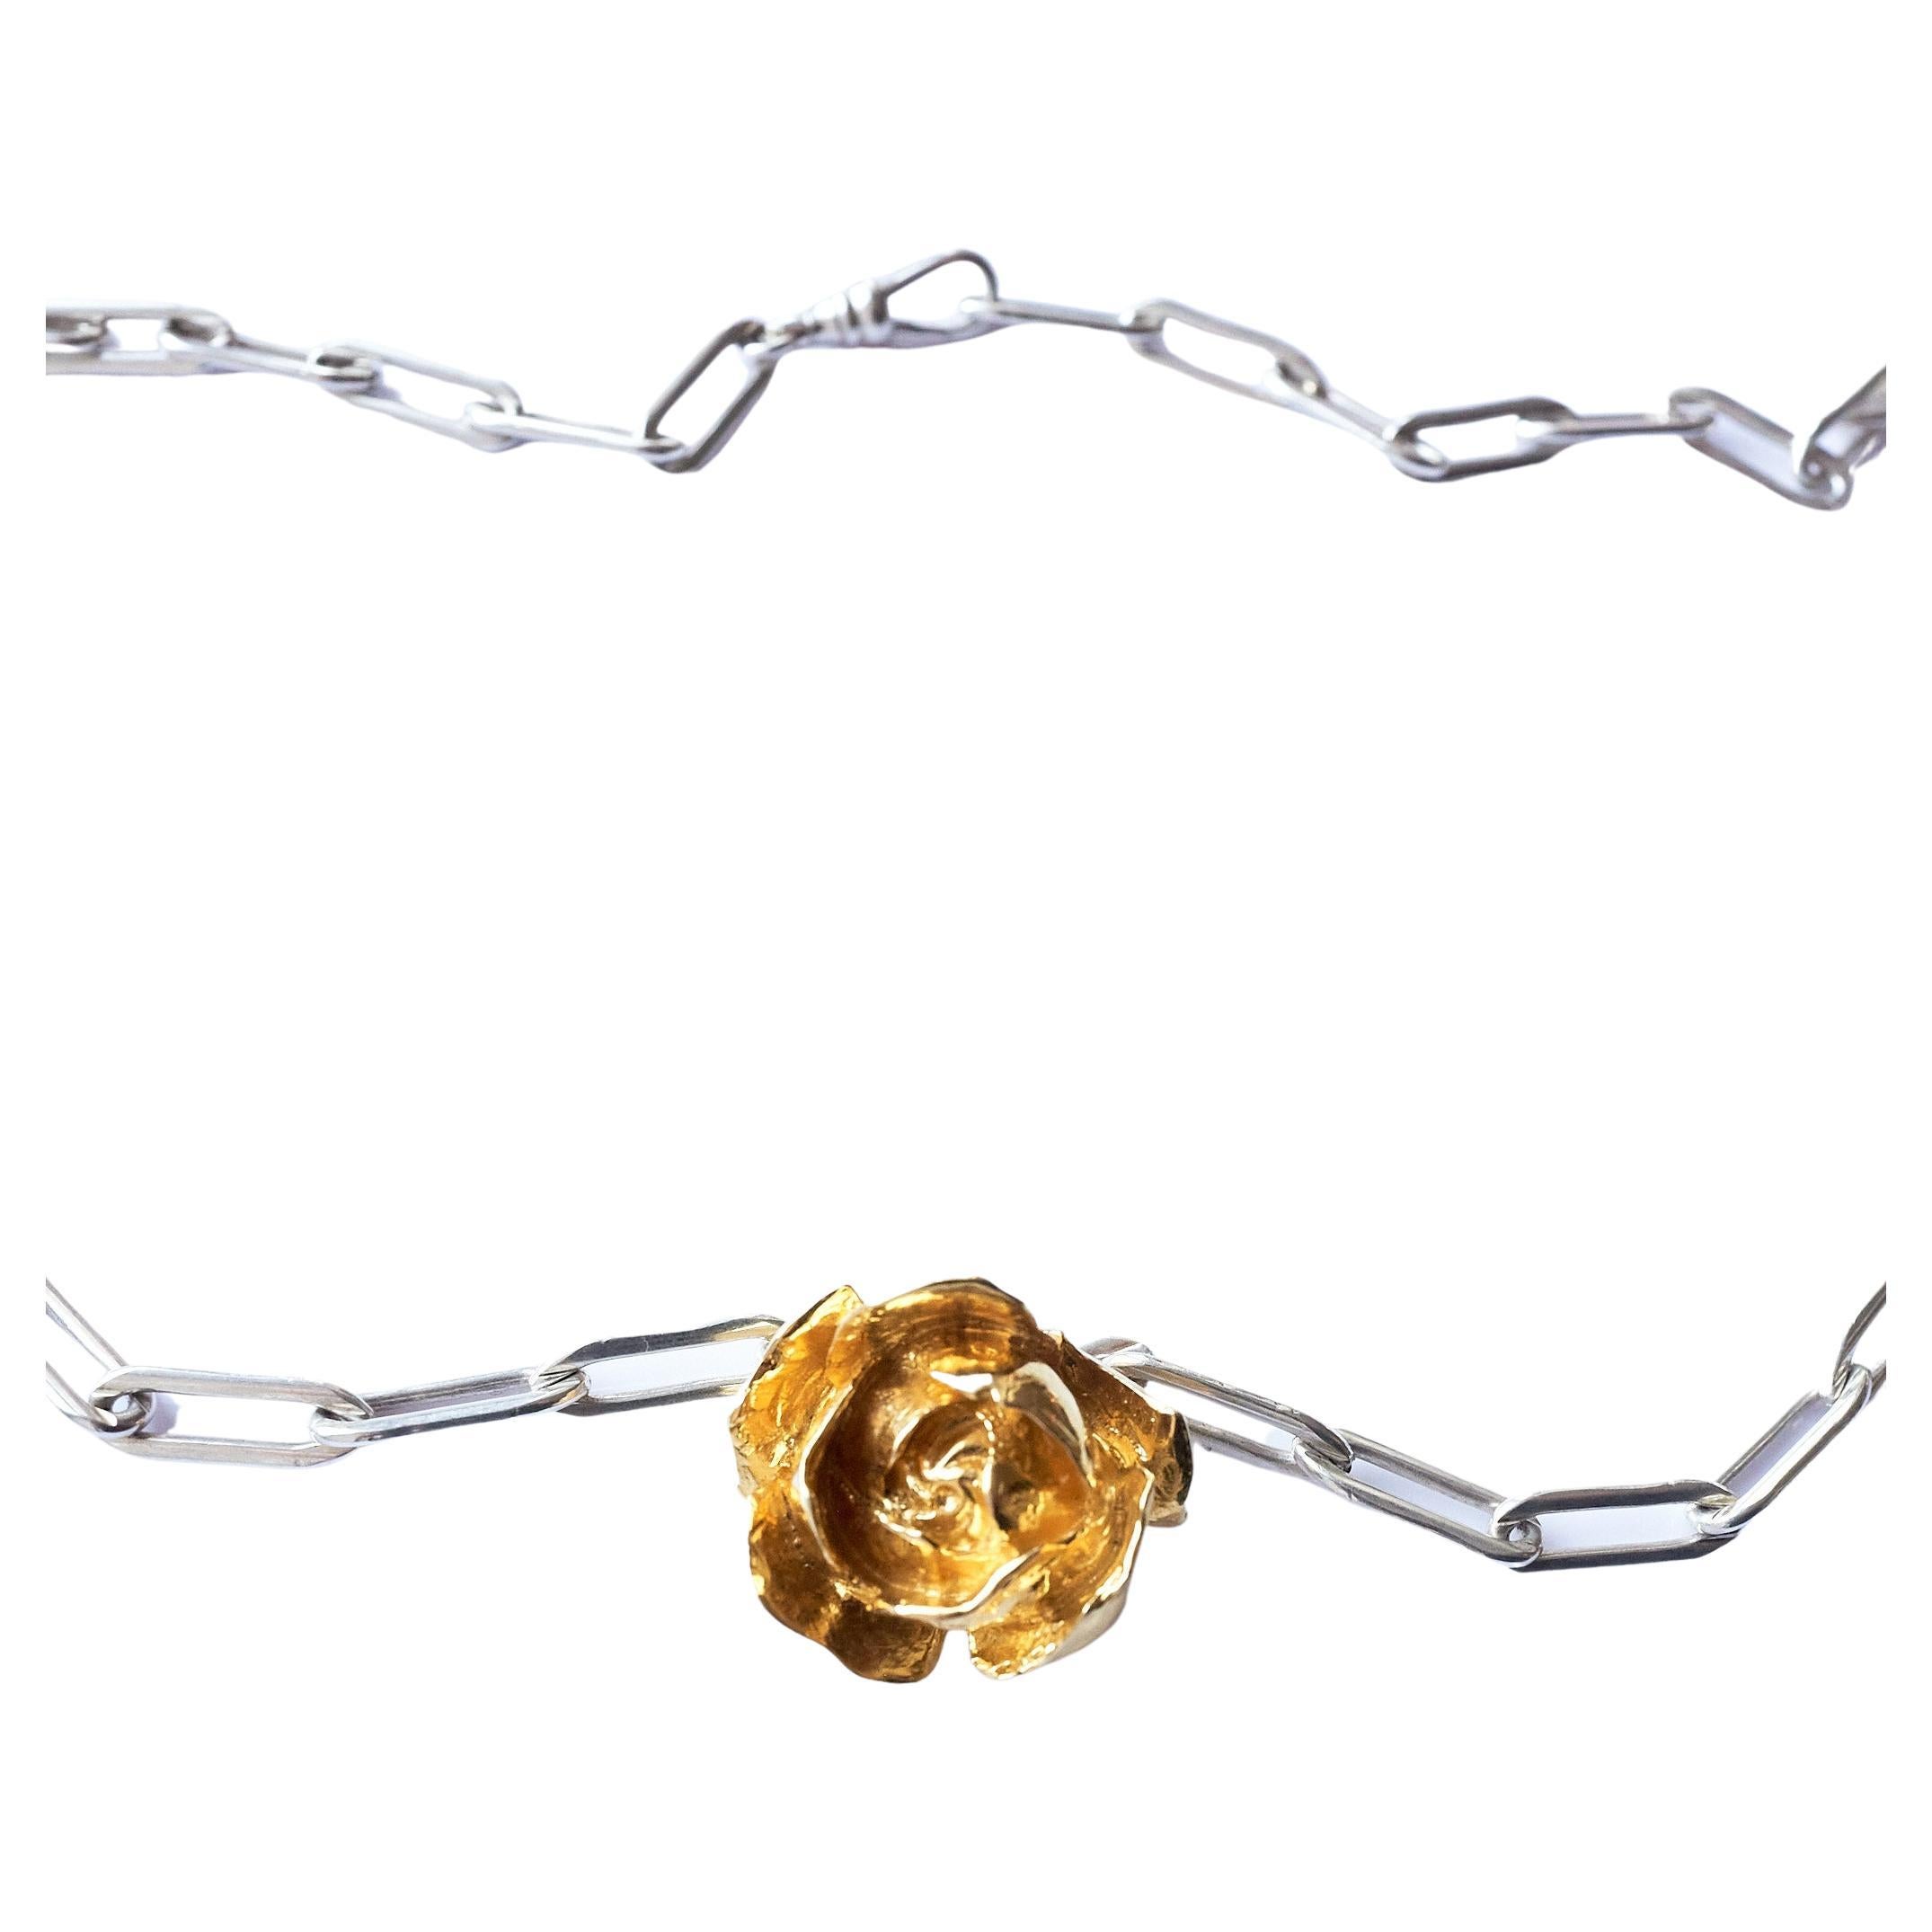 Gold Plated Rose Flower Necklace Love Sterling Silver Chain - Choker or 20